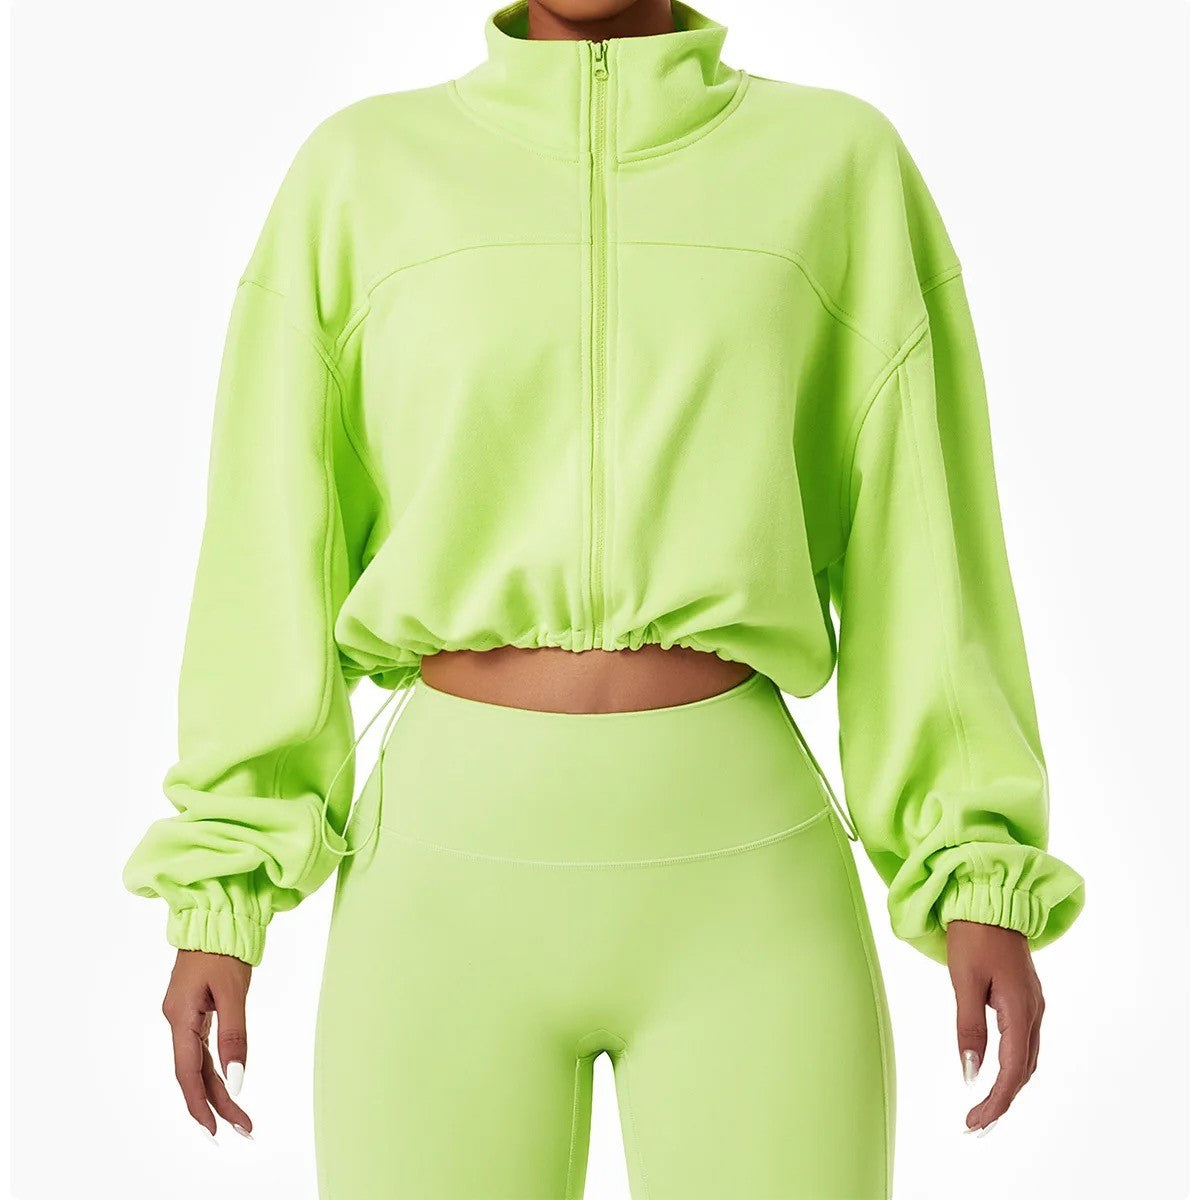 GymBabe Three Piece Set in Lime Green (Made with recycled material)